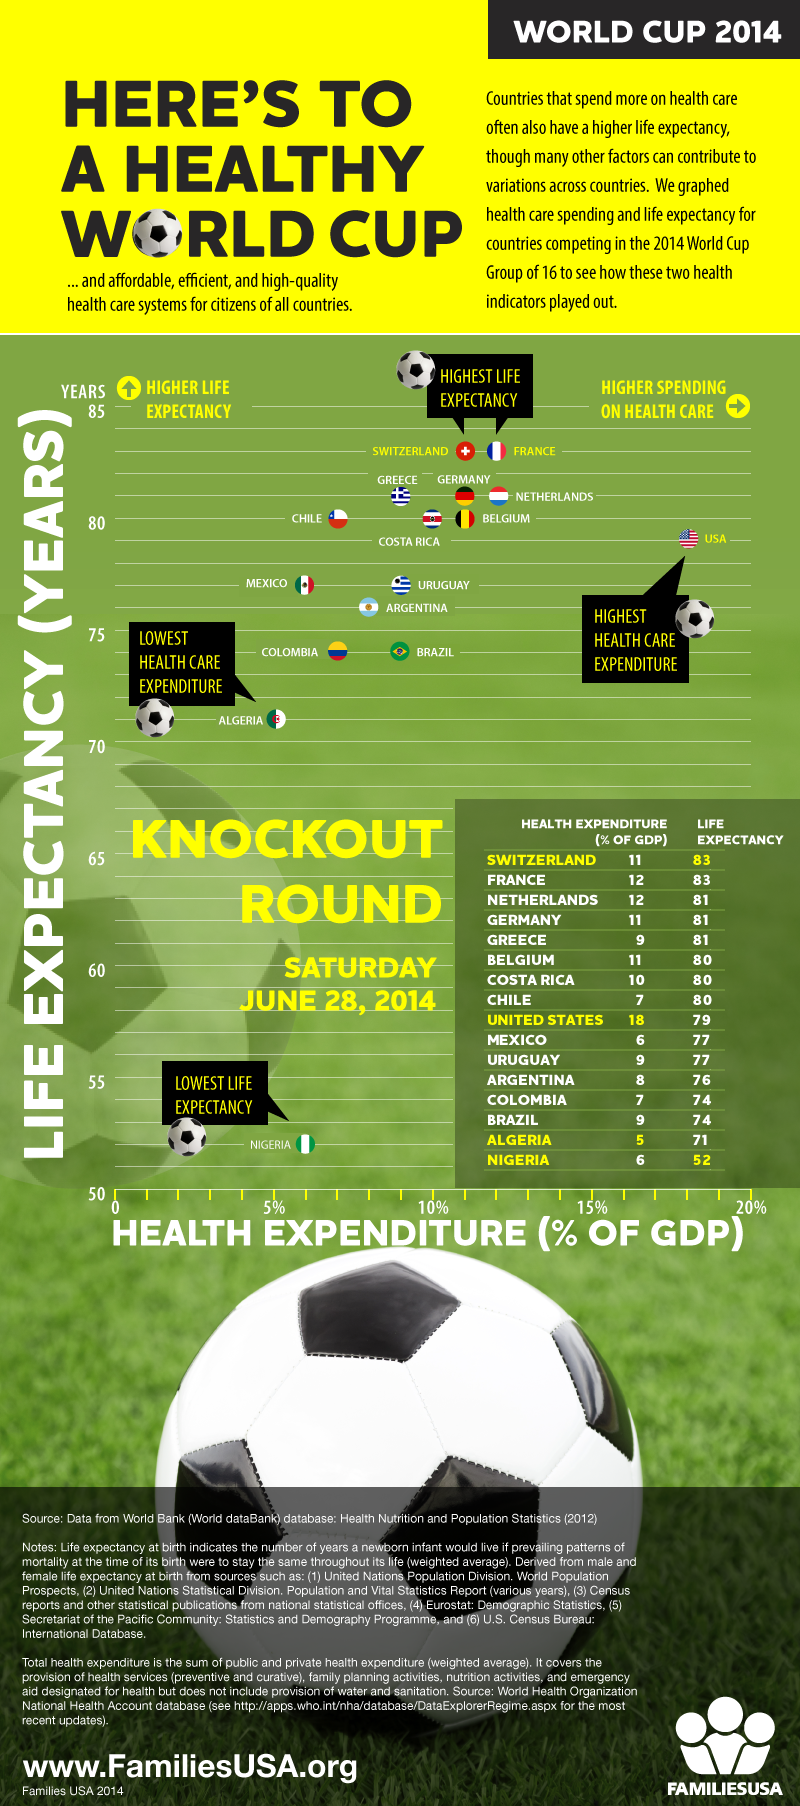 https://www.familiesusa.org/wp-content/uploads/2014/06/FamiliesUSA_WorldCup2014_Infographic_0.png